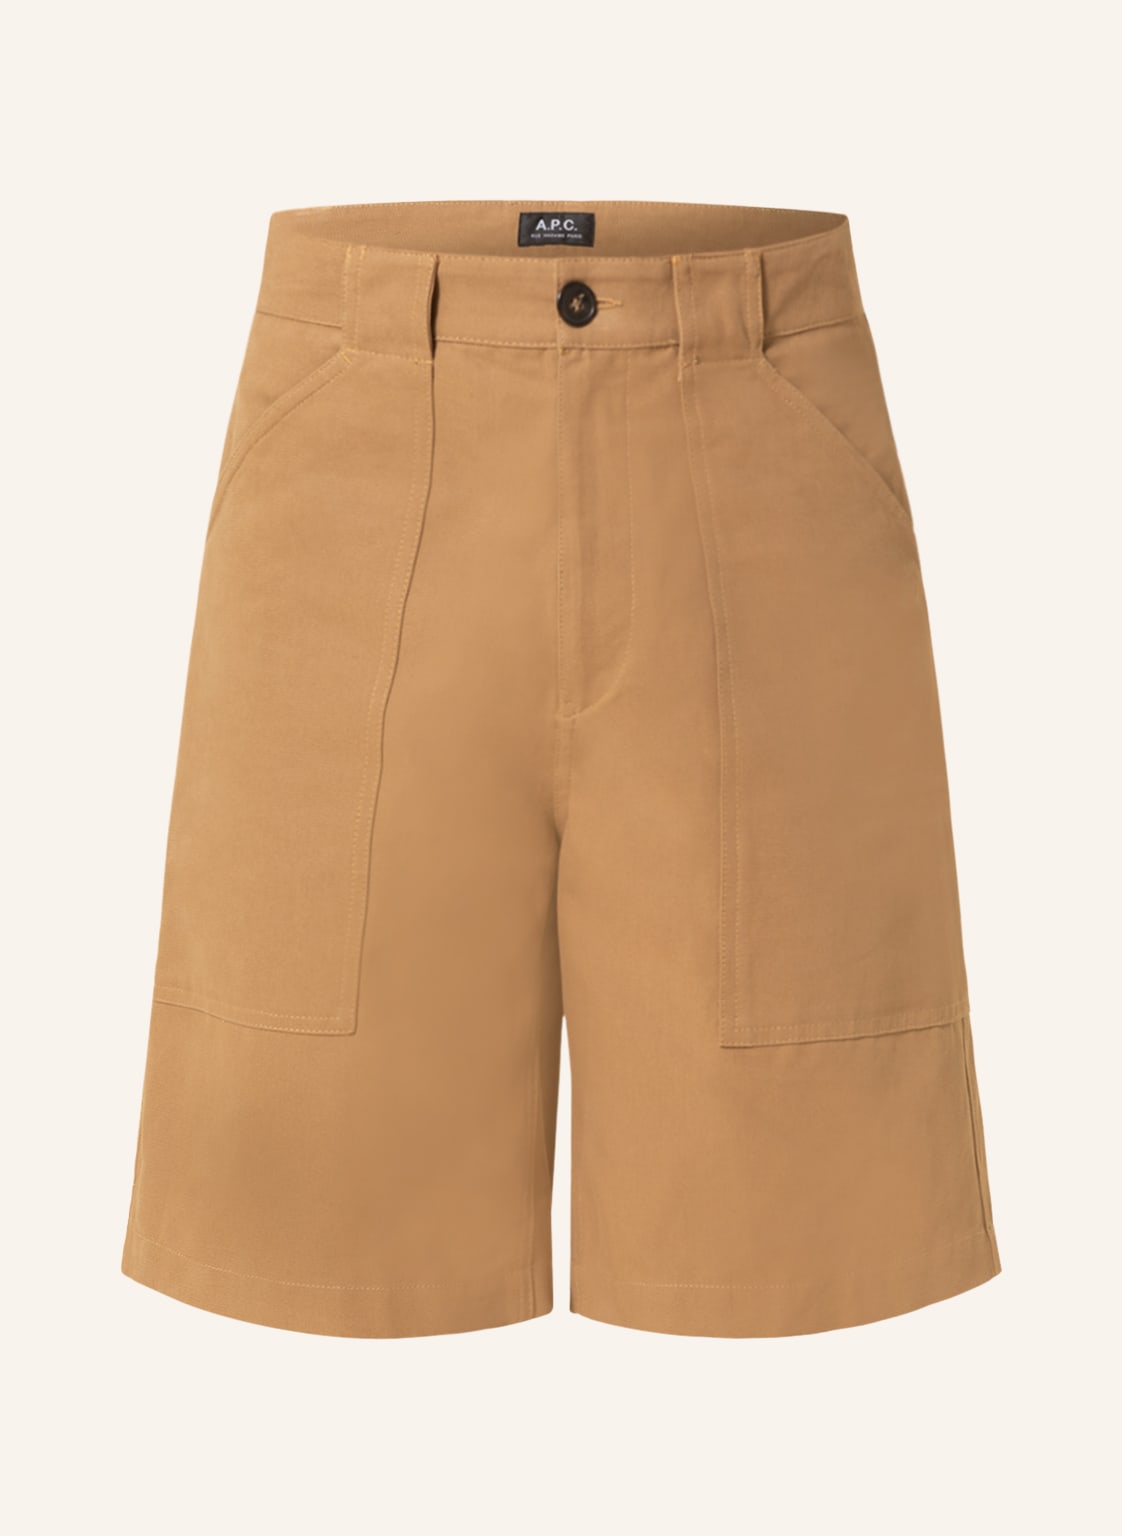 Image of A.P.C. Shorts Melbourne braun